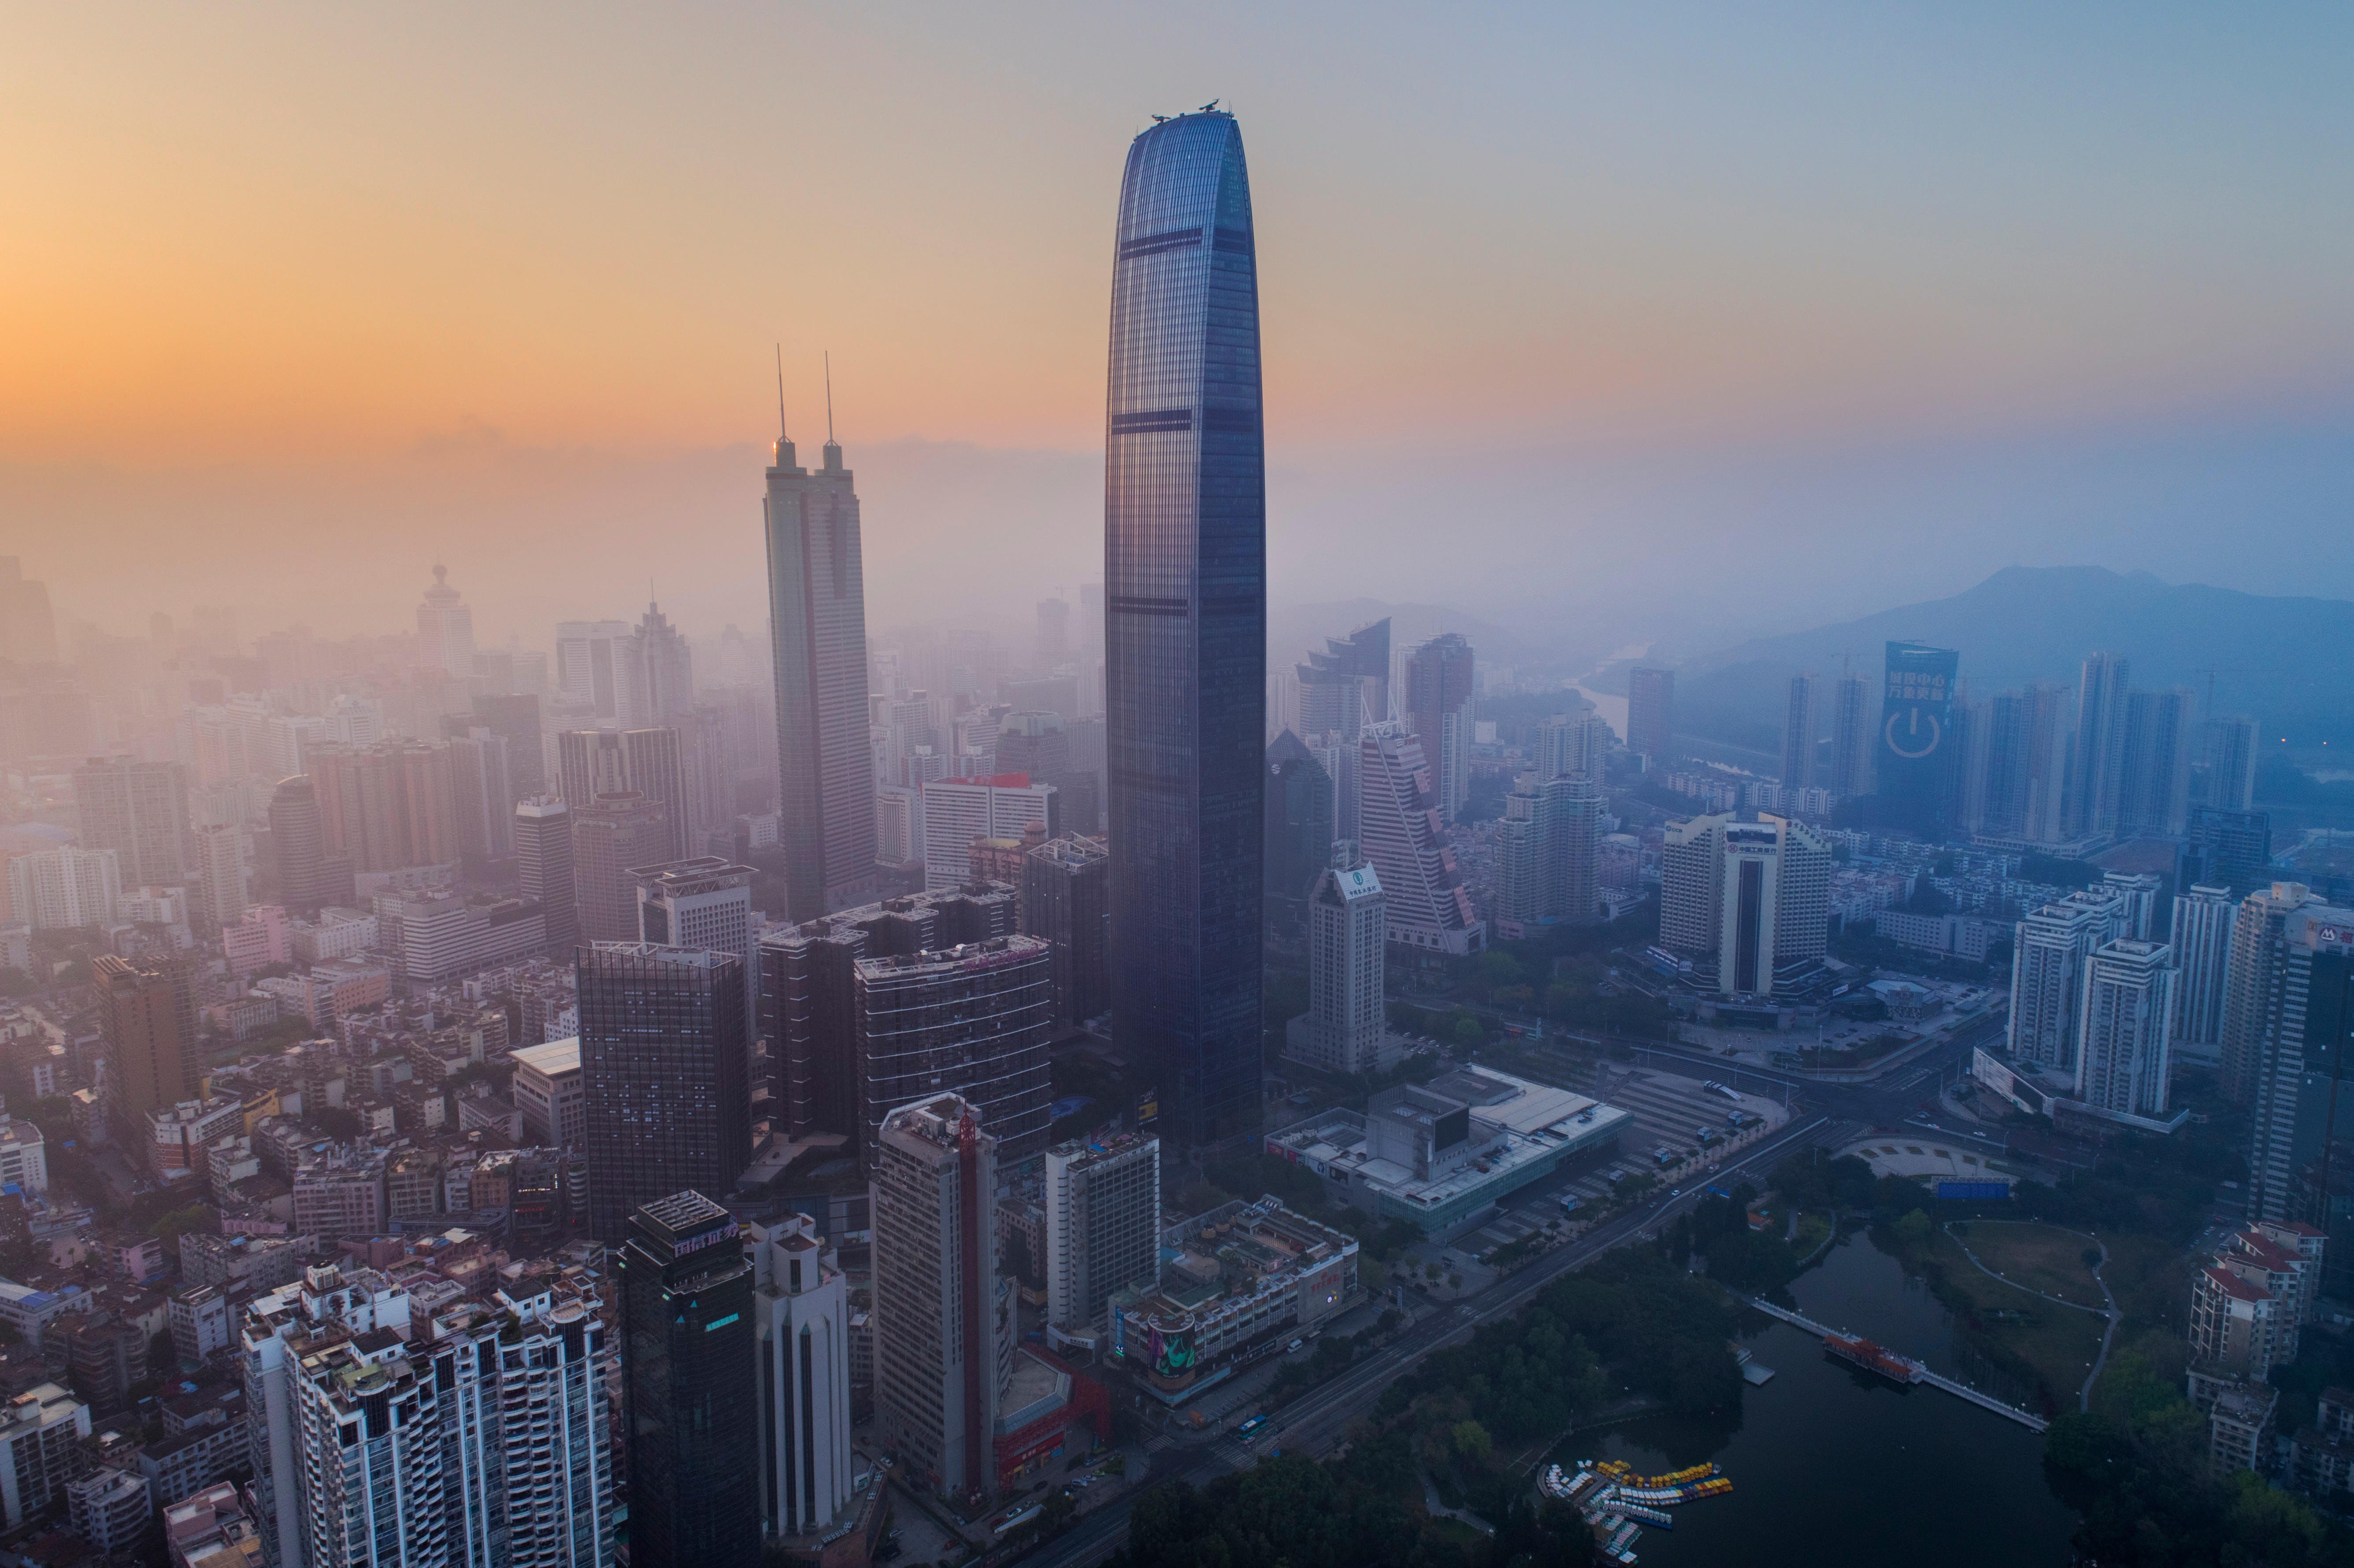 The Kingkey 100, a 100-storey skyscraper and the world’s 14th tallest building, stands against at sunrise in Shenzhen, China. Photo: Handout